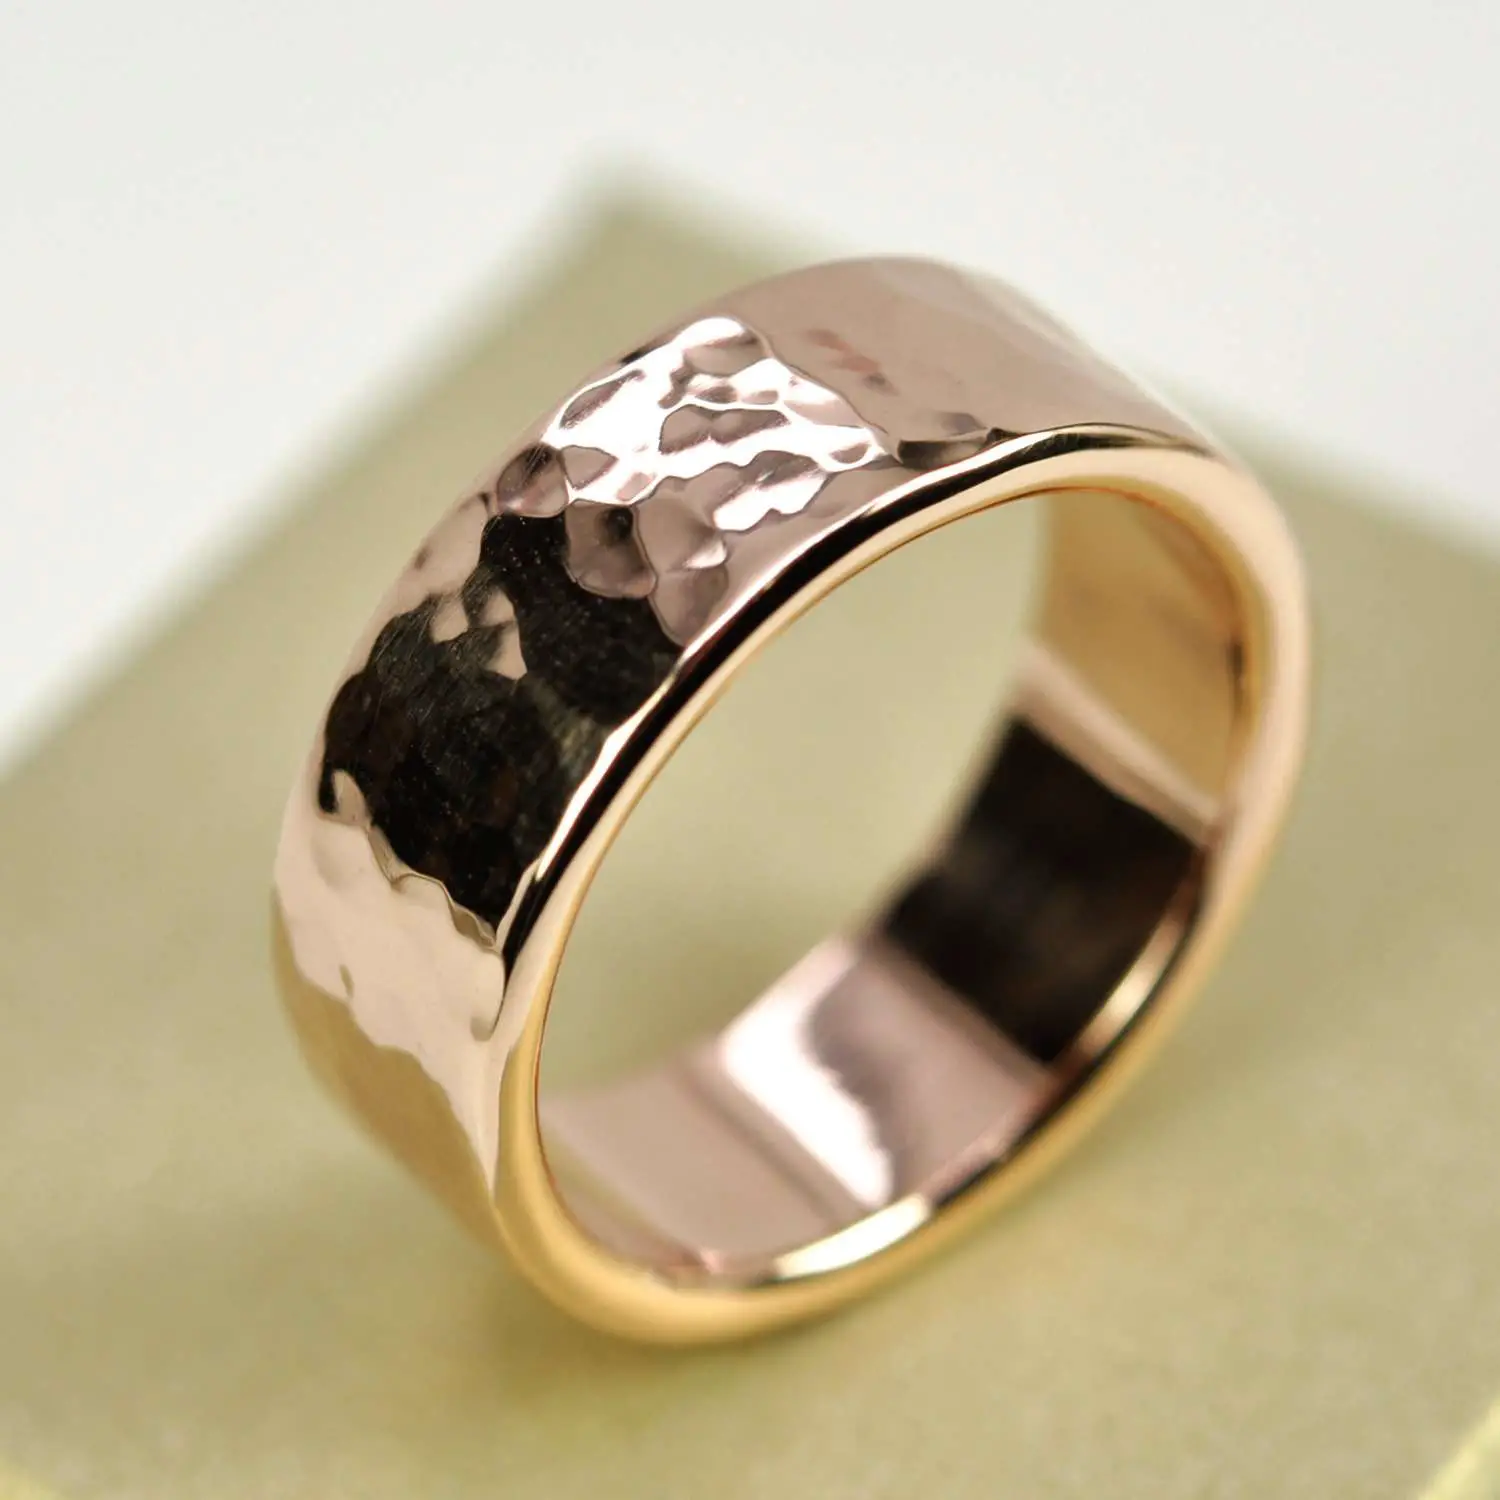 Mens Wedding Band in Rose Gold Hammered Gold Ring 8mm Wide